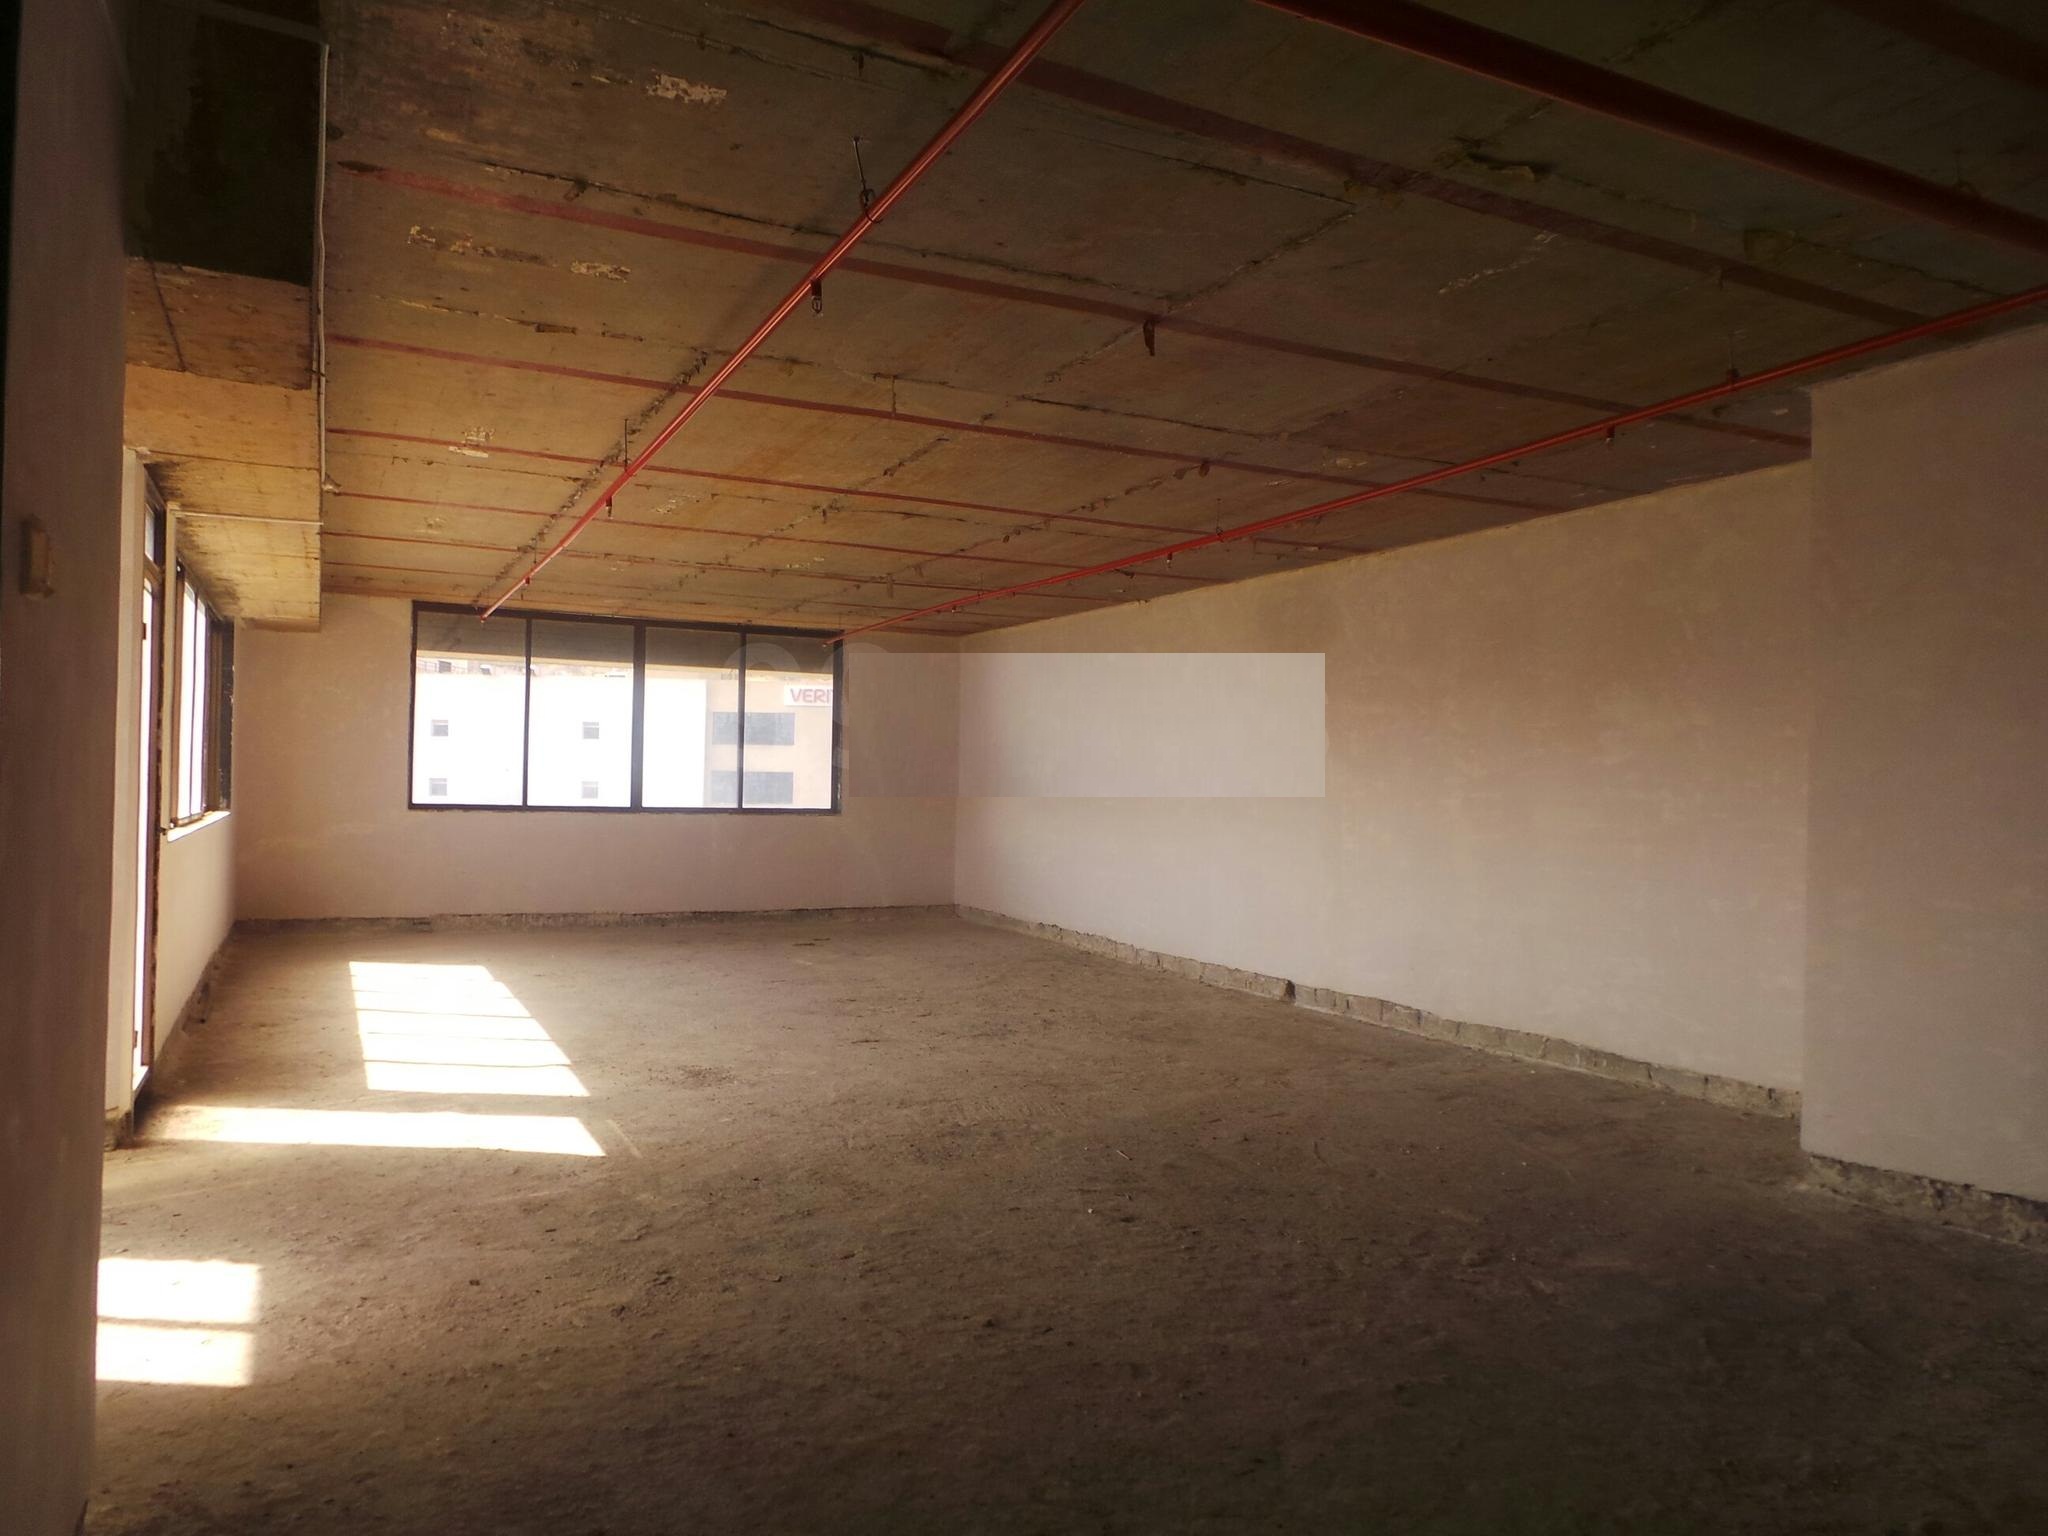 1689 Sq.Ft. UnFurnished Office/Space @ 1.18 Lac(s) for Rent/Lease in Baner, 